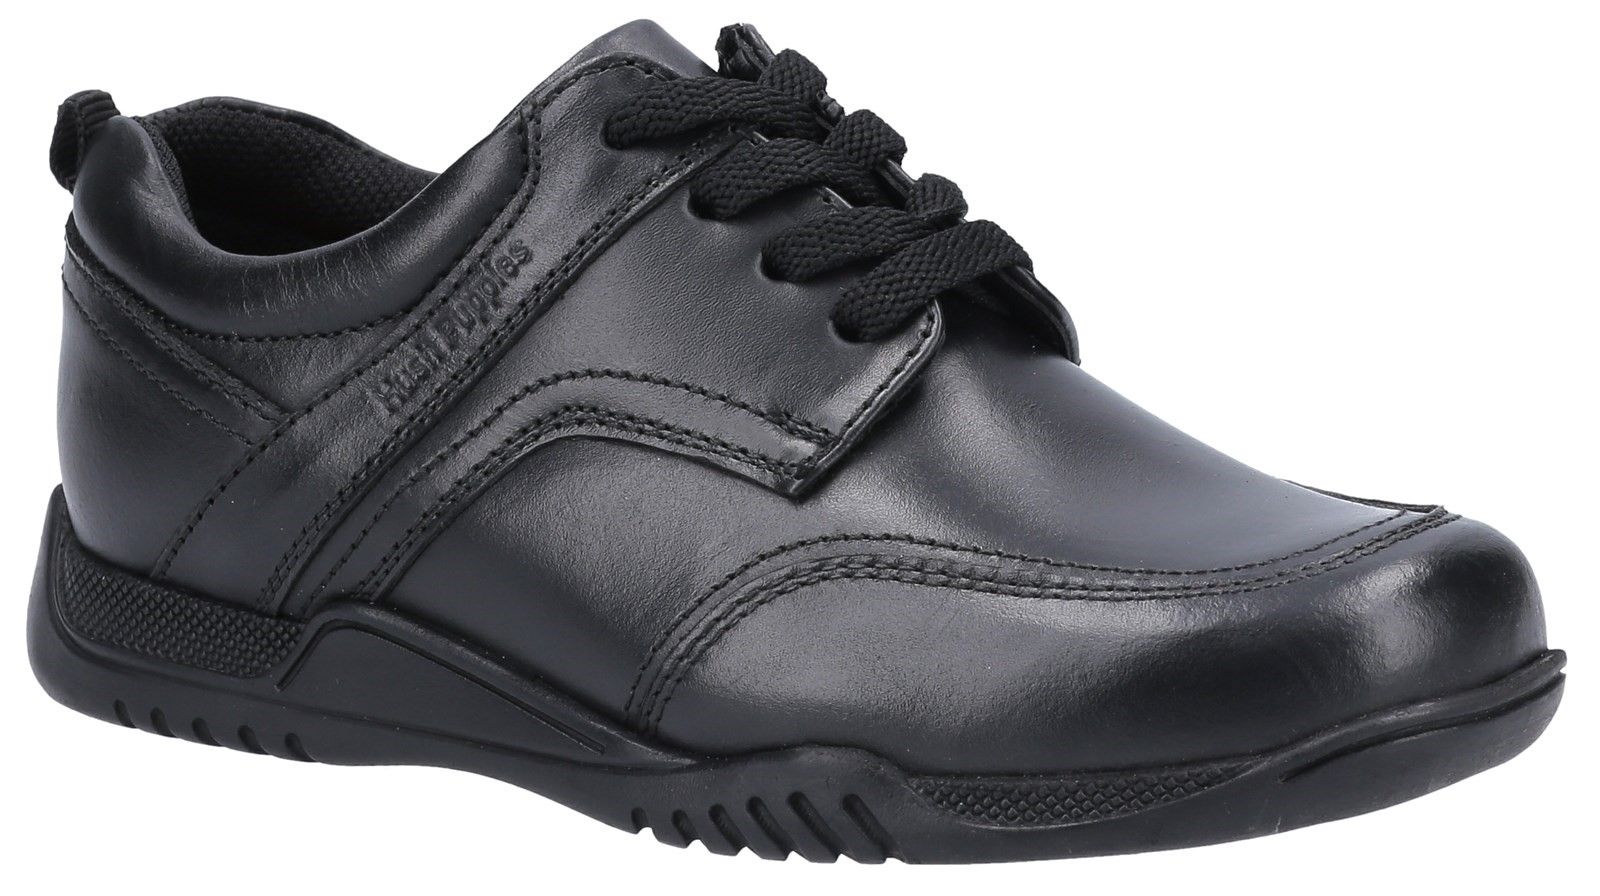 Harvey is a single fit smooth leather lace up boys school shoe, with reinforced panels on the toe and heel for additional support.  Lightweight midsole with a memory foam footbed providing all day comfort.Leather Upper. 
Memory Foam Insole. 
Micro-Fresh Lining.